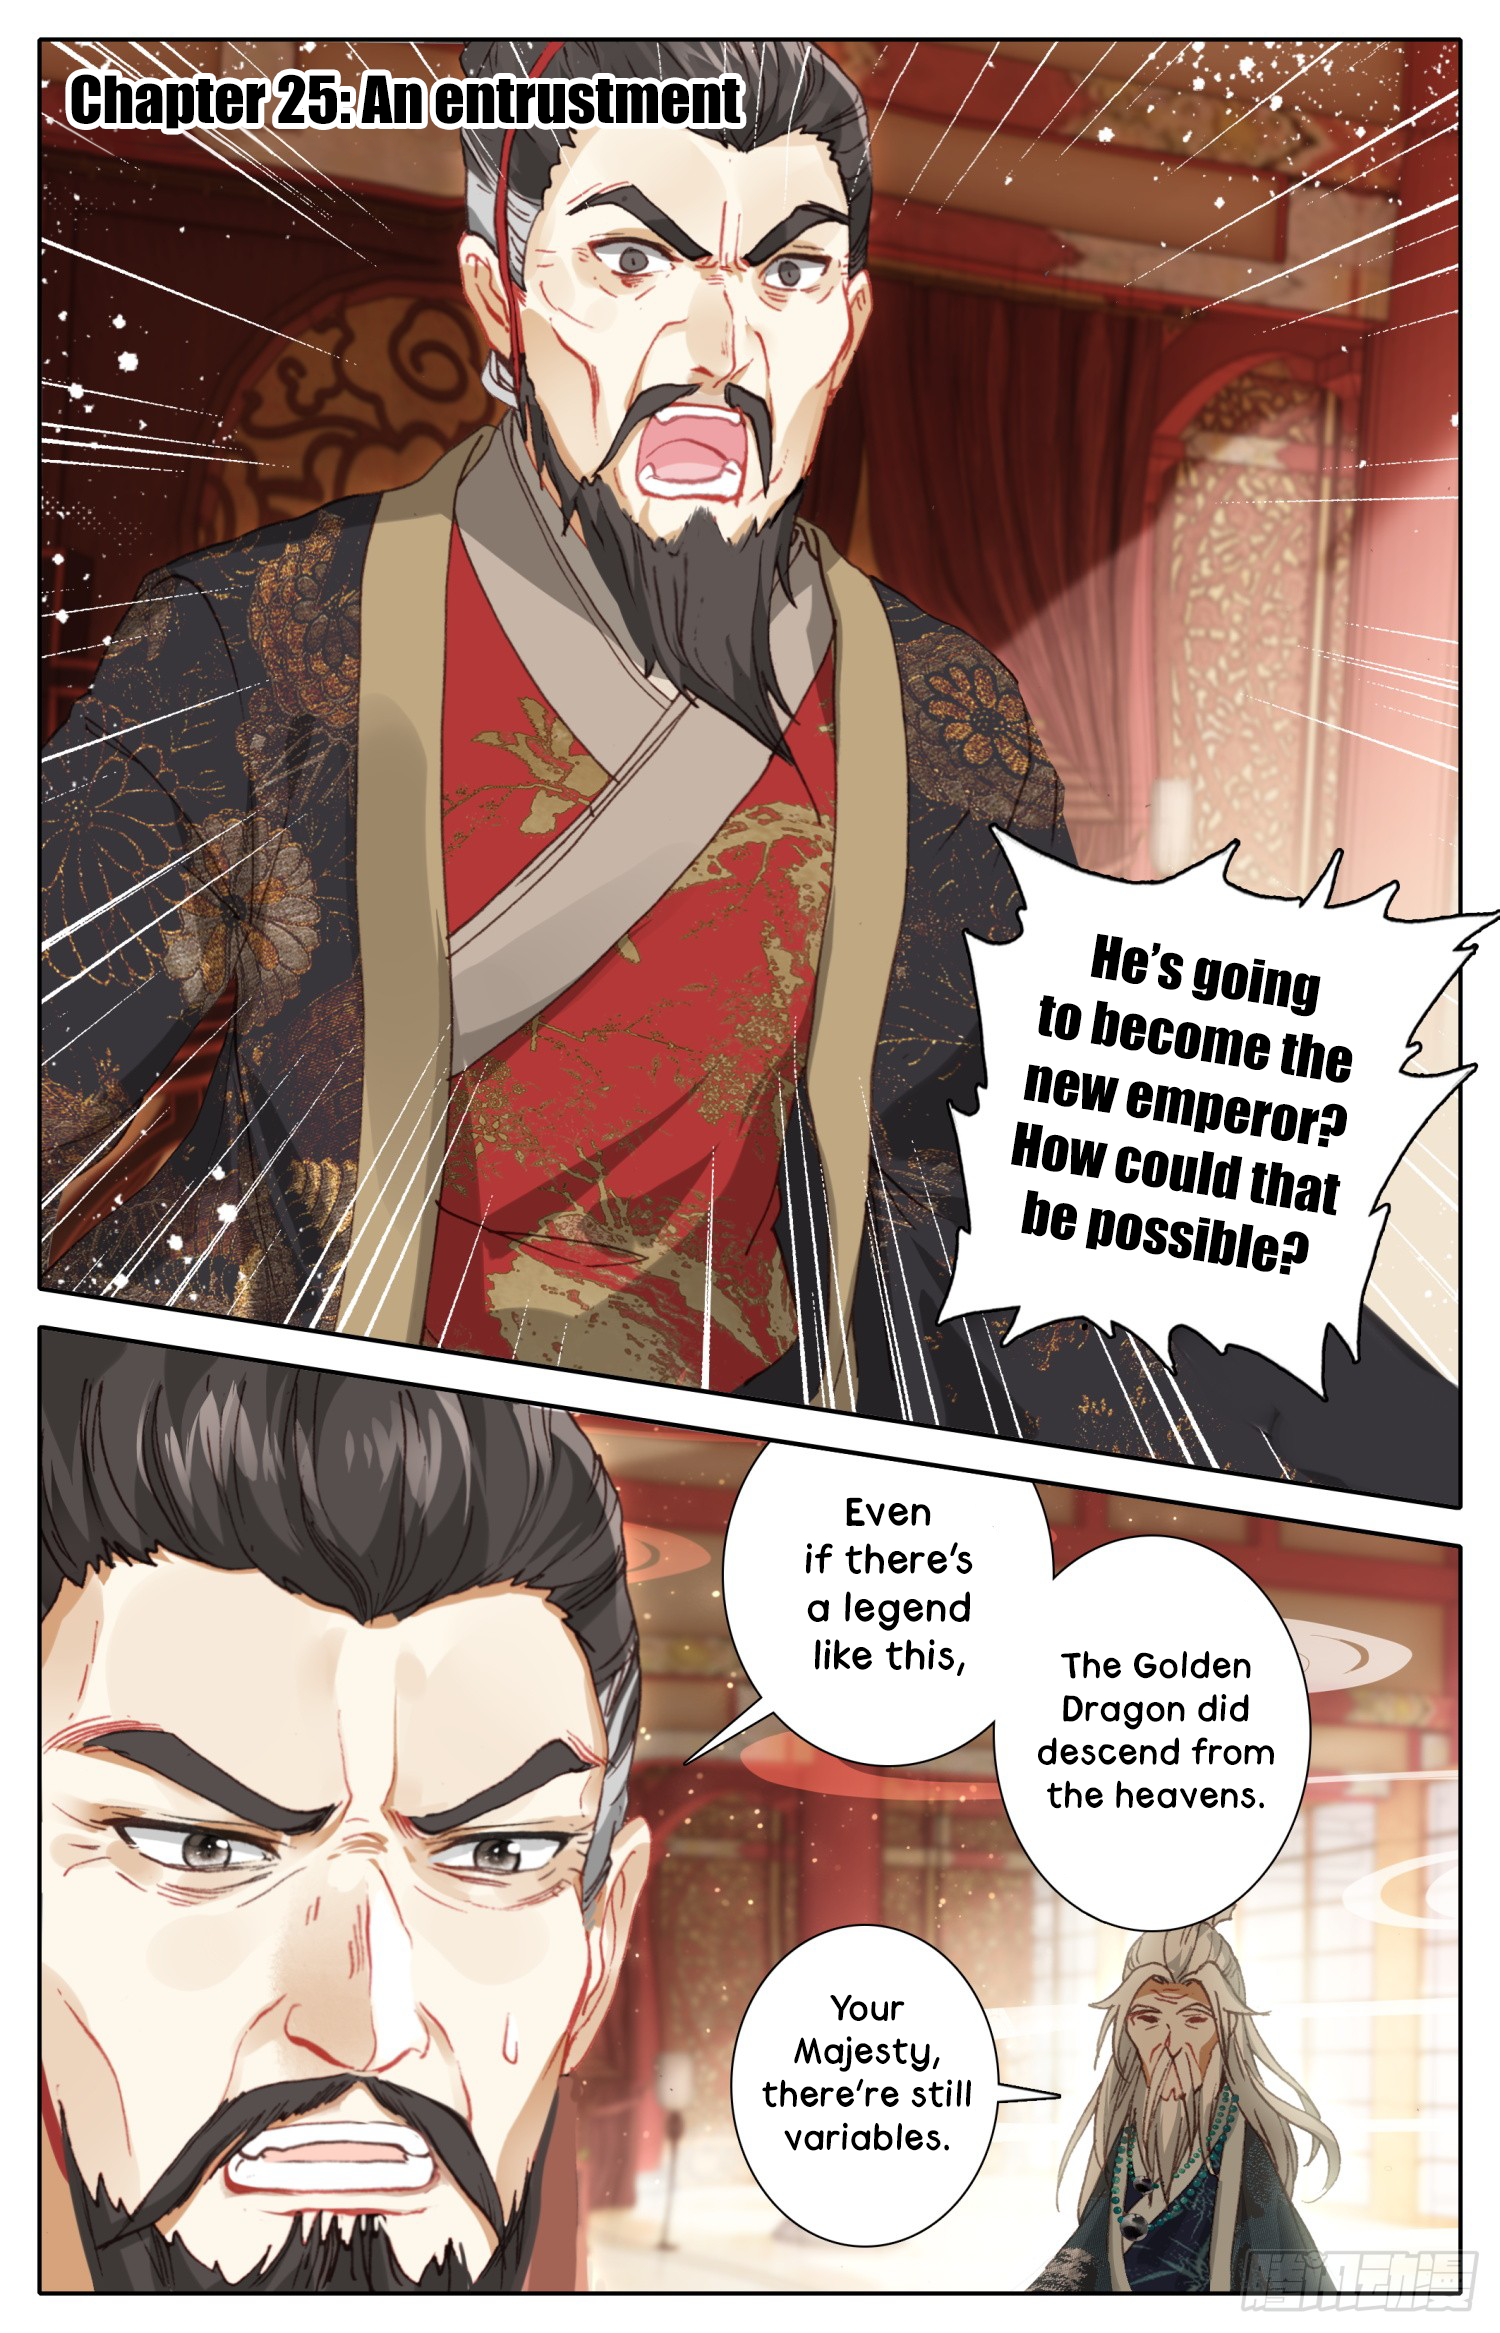 Legend Of The Tyrant Empress Chapter 25: An Entrustment - Picture 2